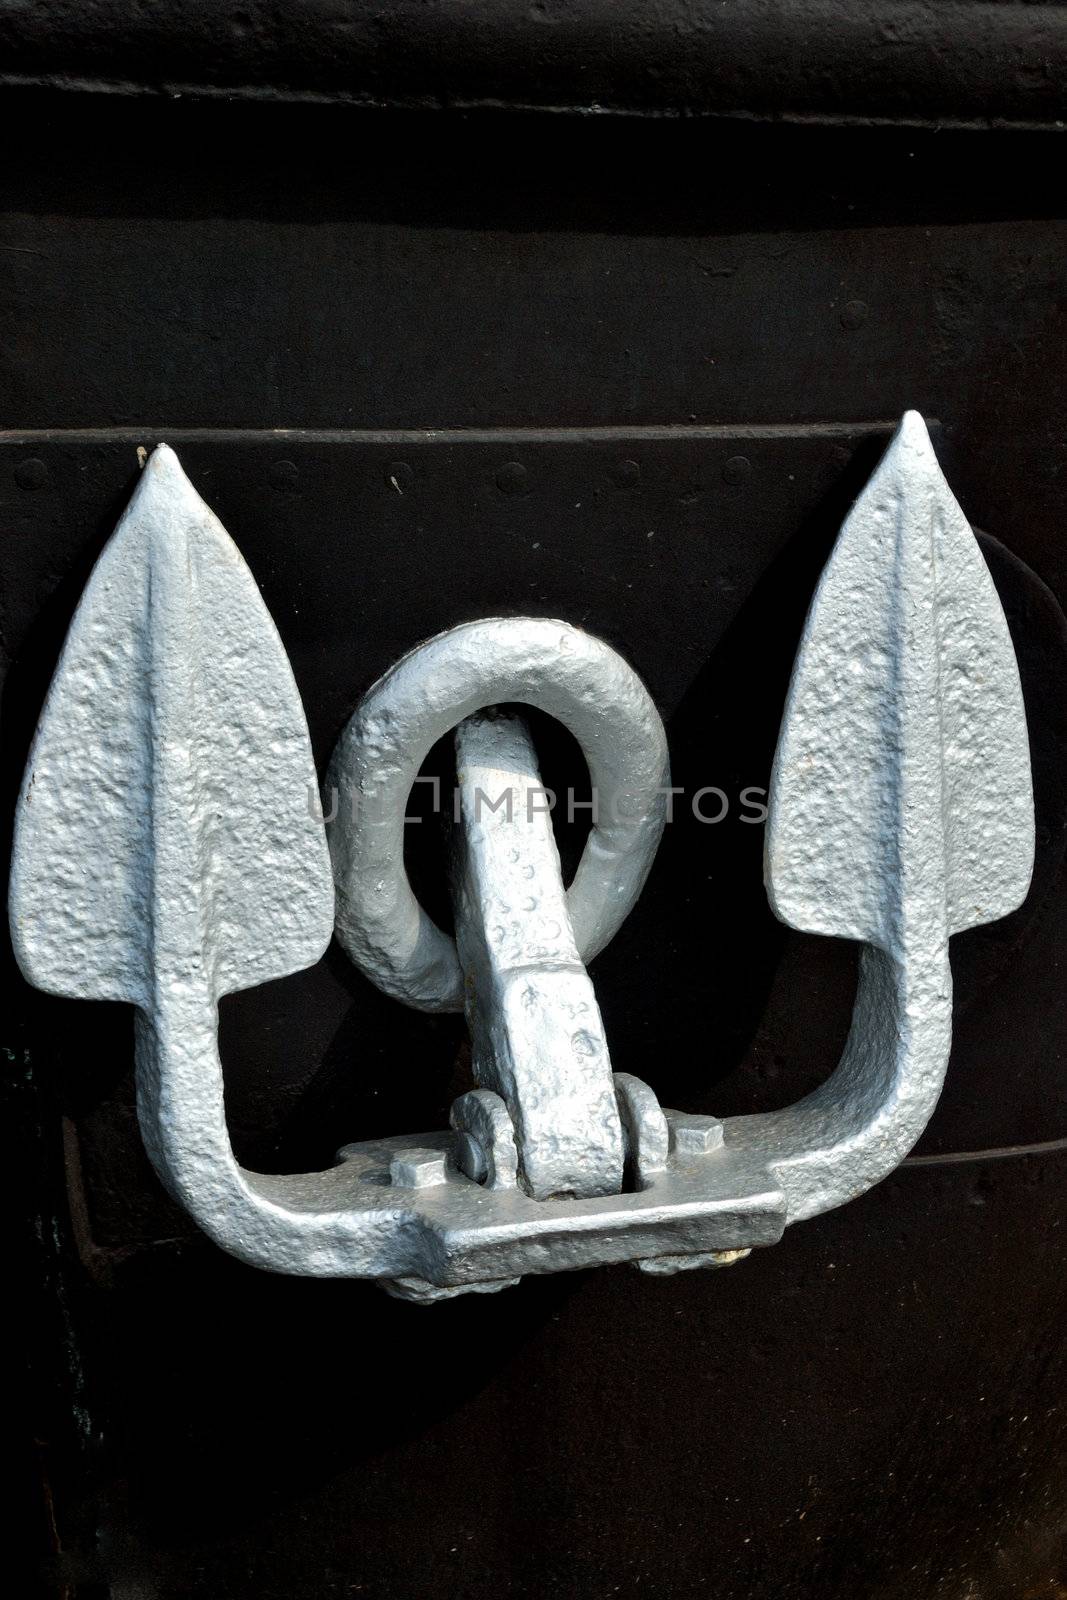 Silver Anchor with black background on Boat